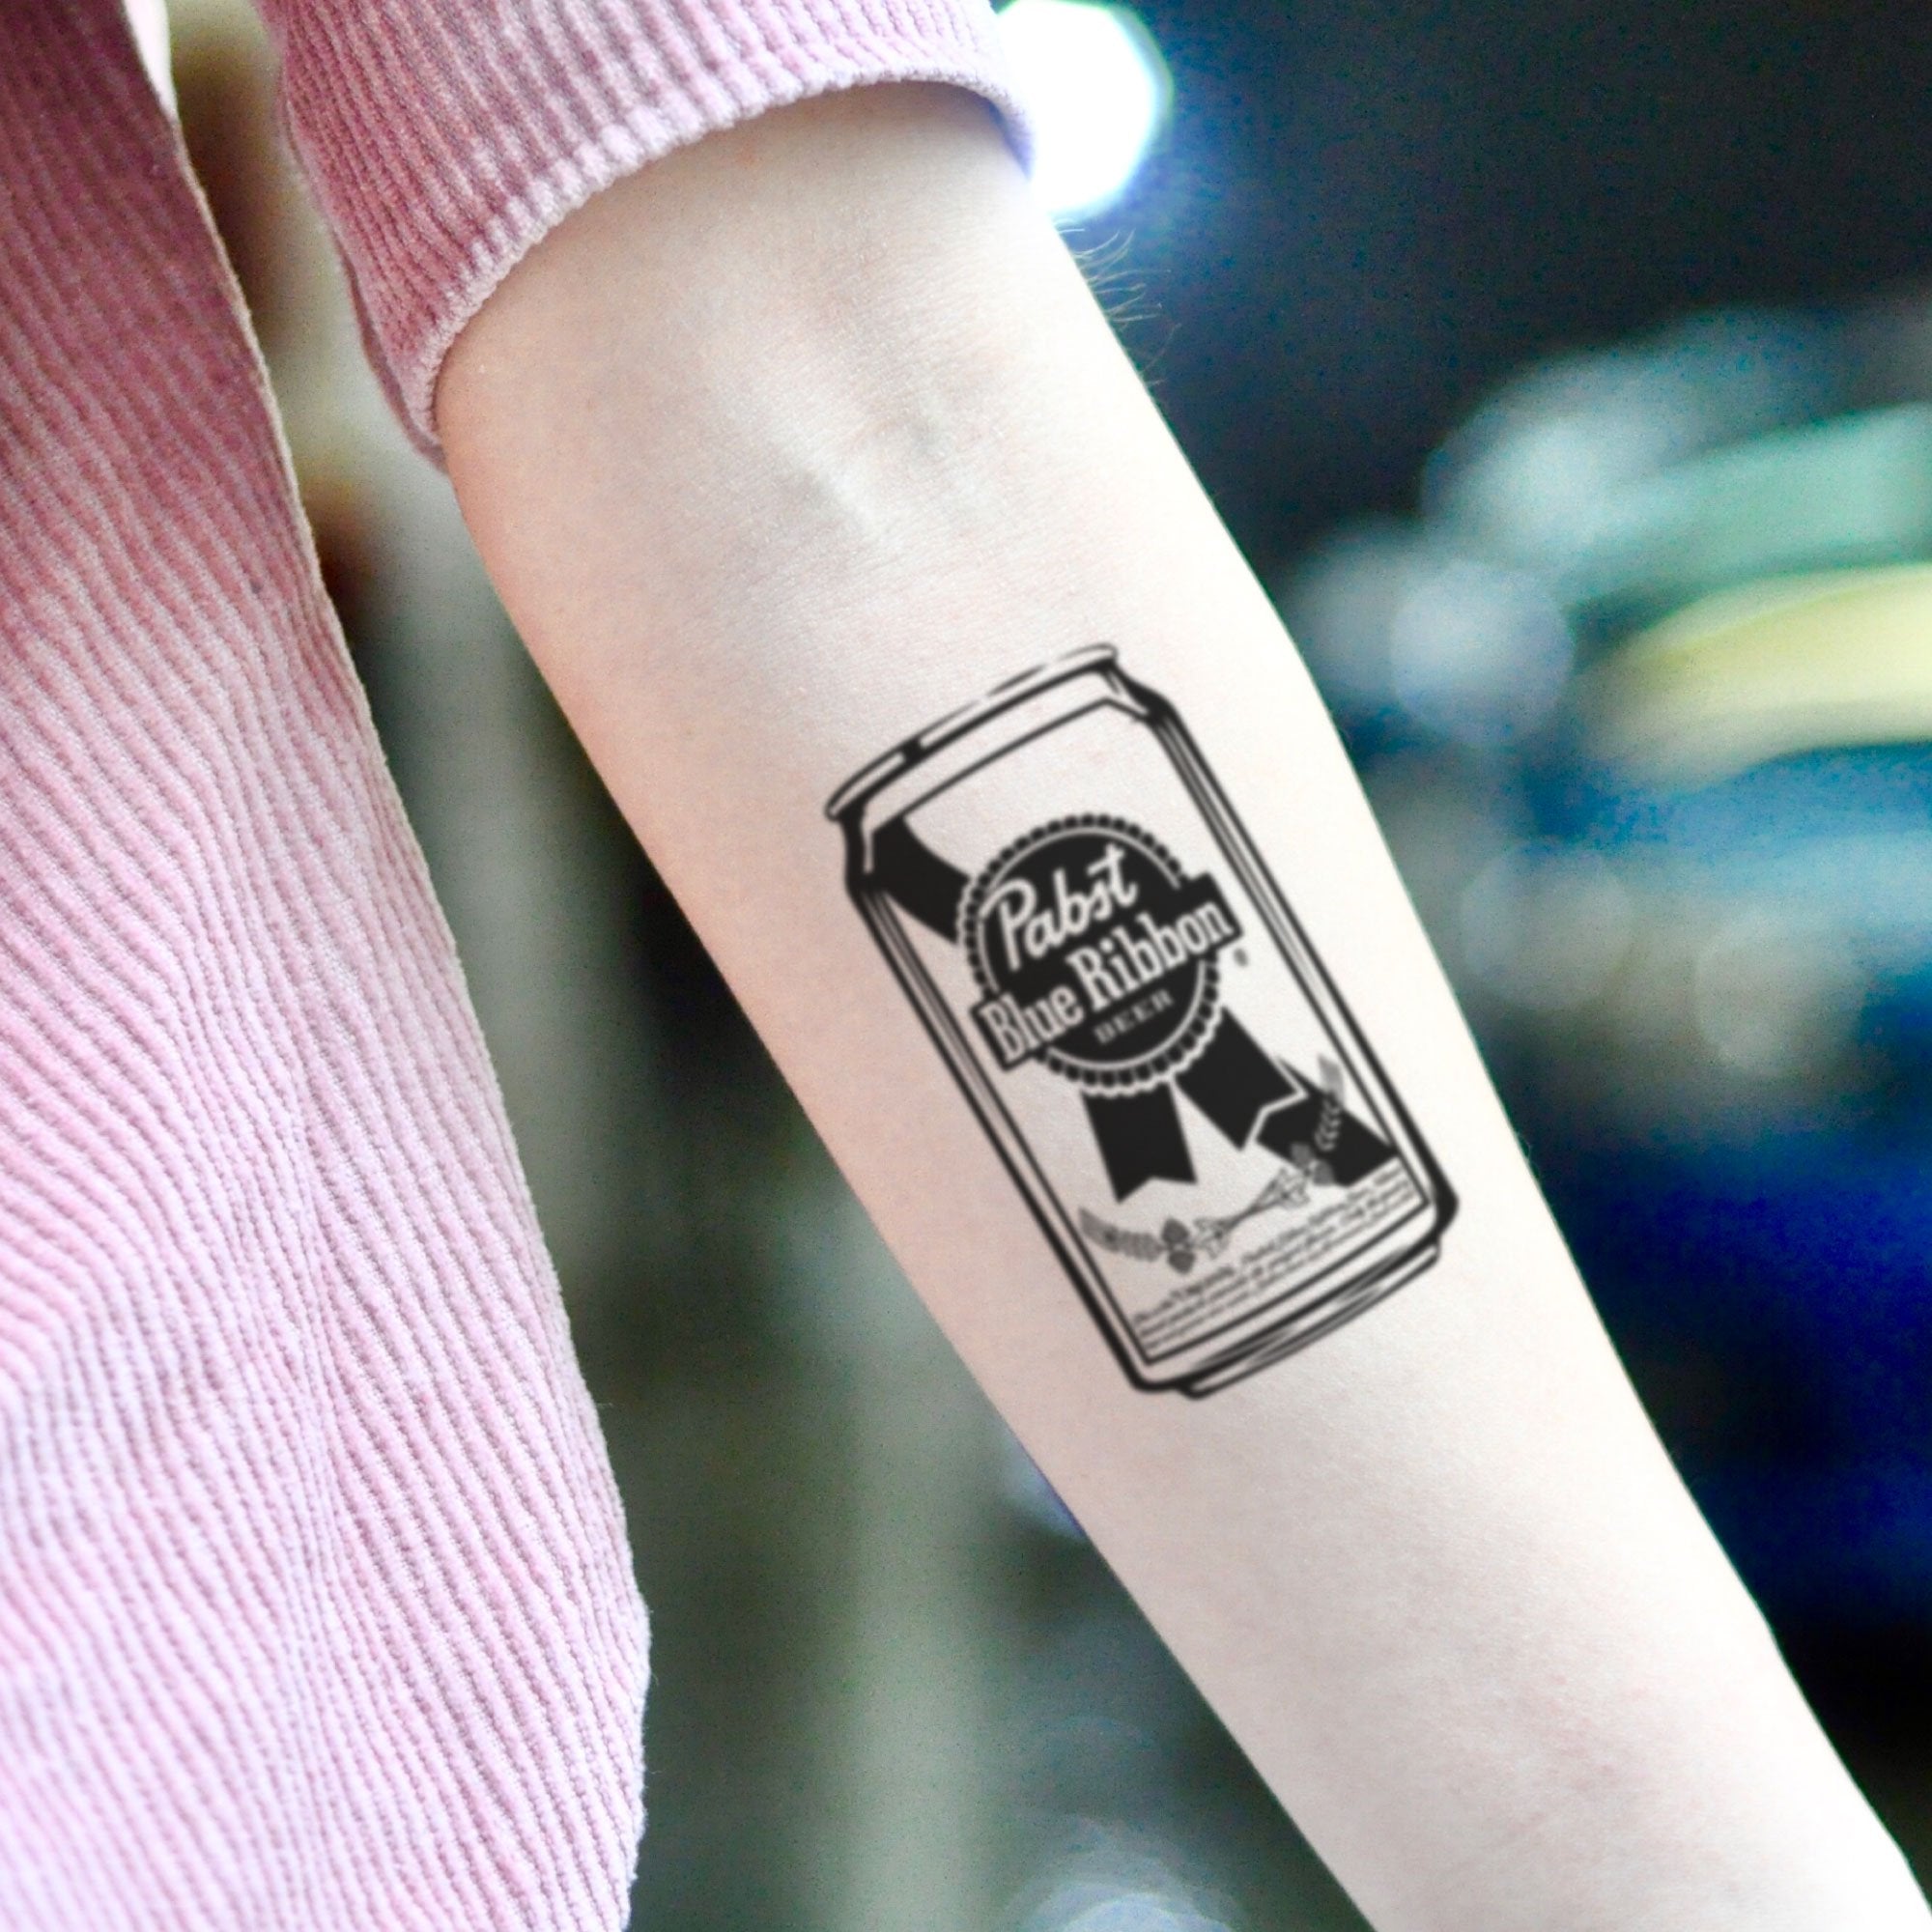 Tattoo & Beers | Tattoo and beers | Steven Darrah | Flickr